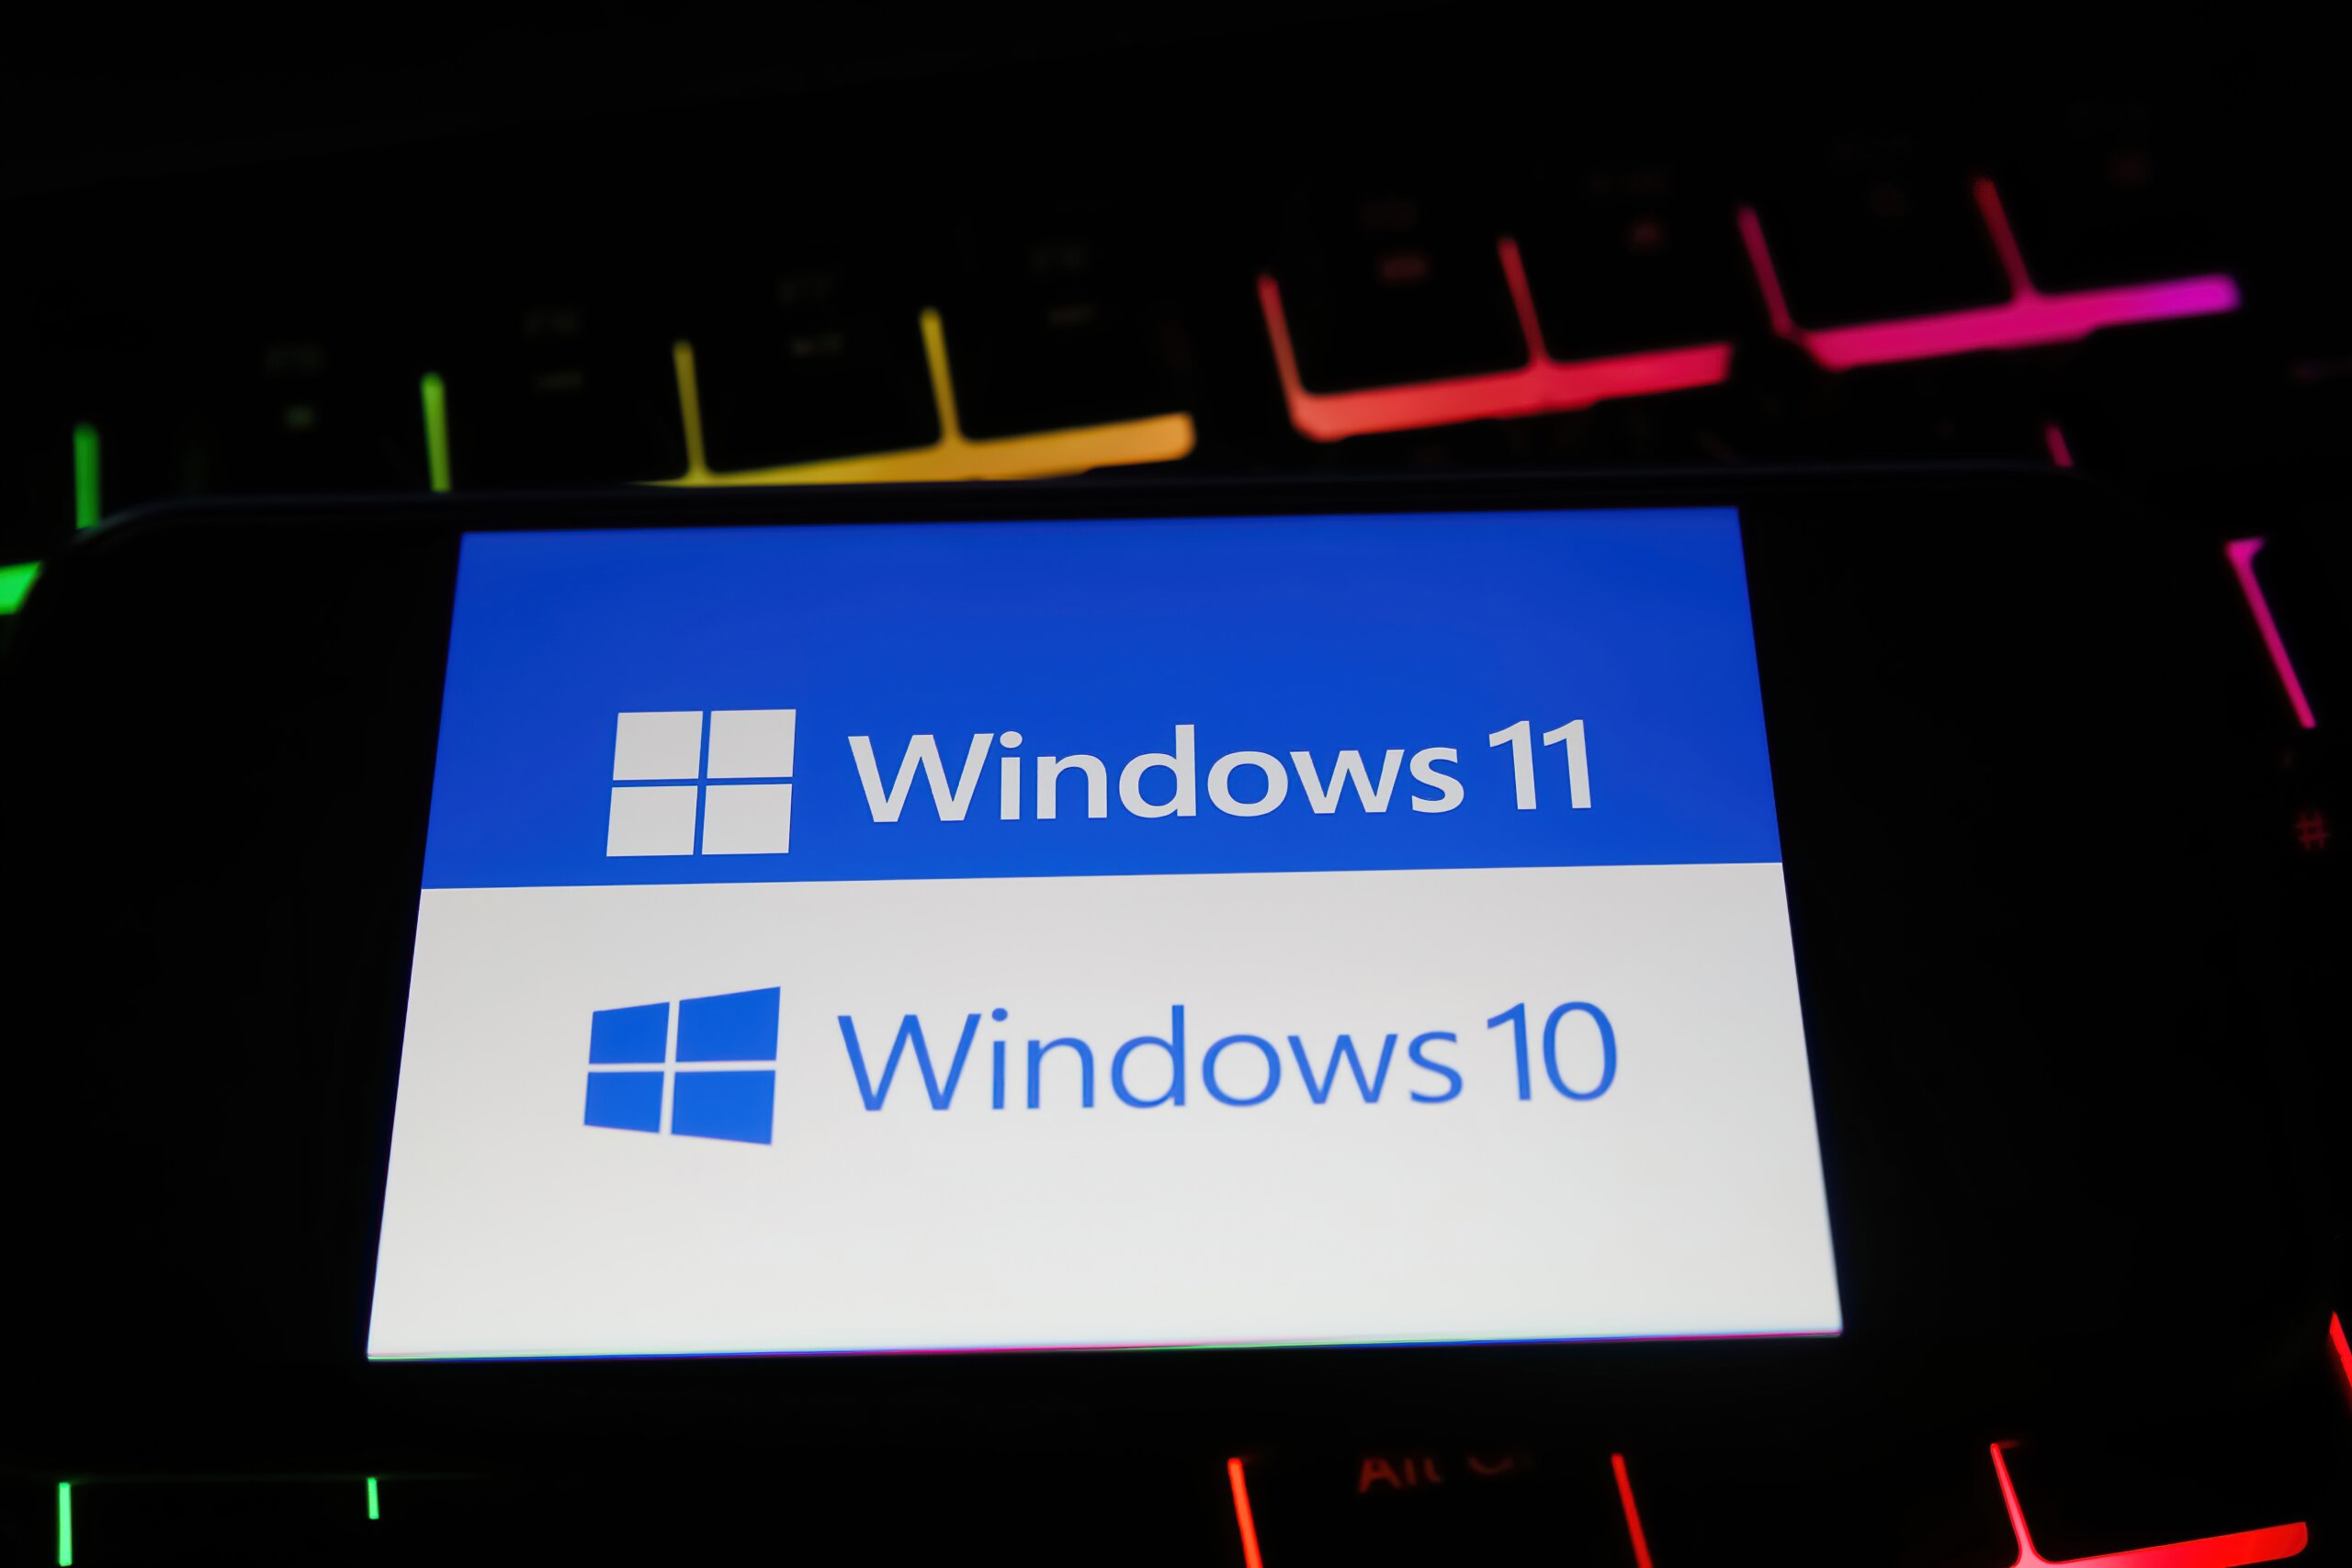 Windows 11 will leave millions of PCs behind, and Microsoft is